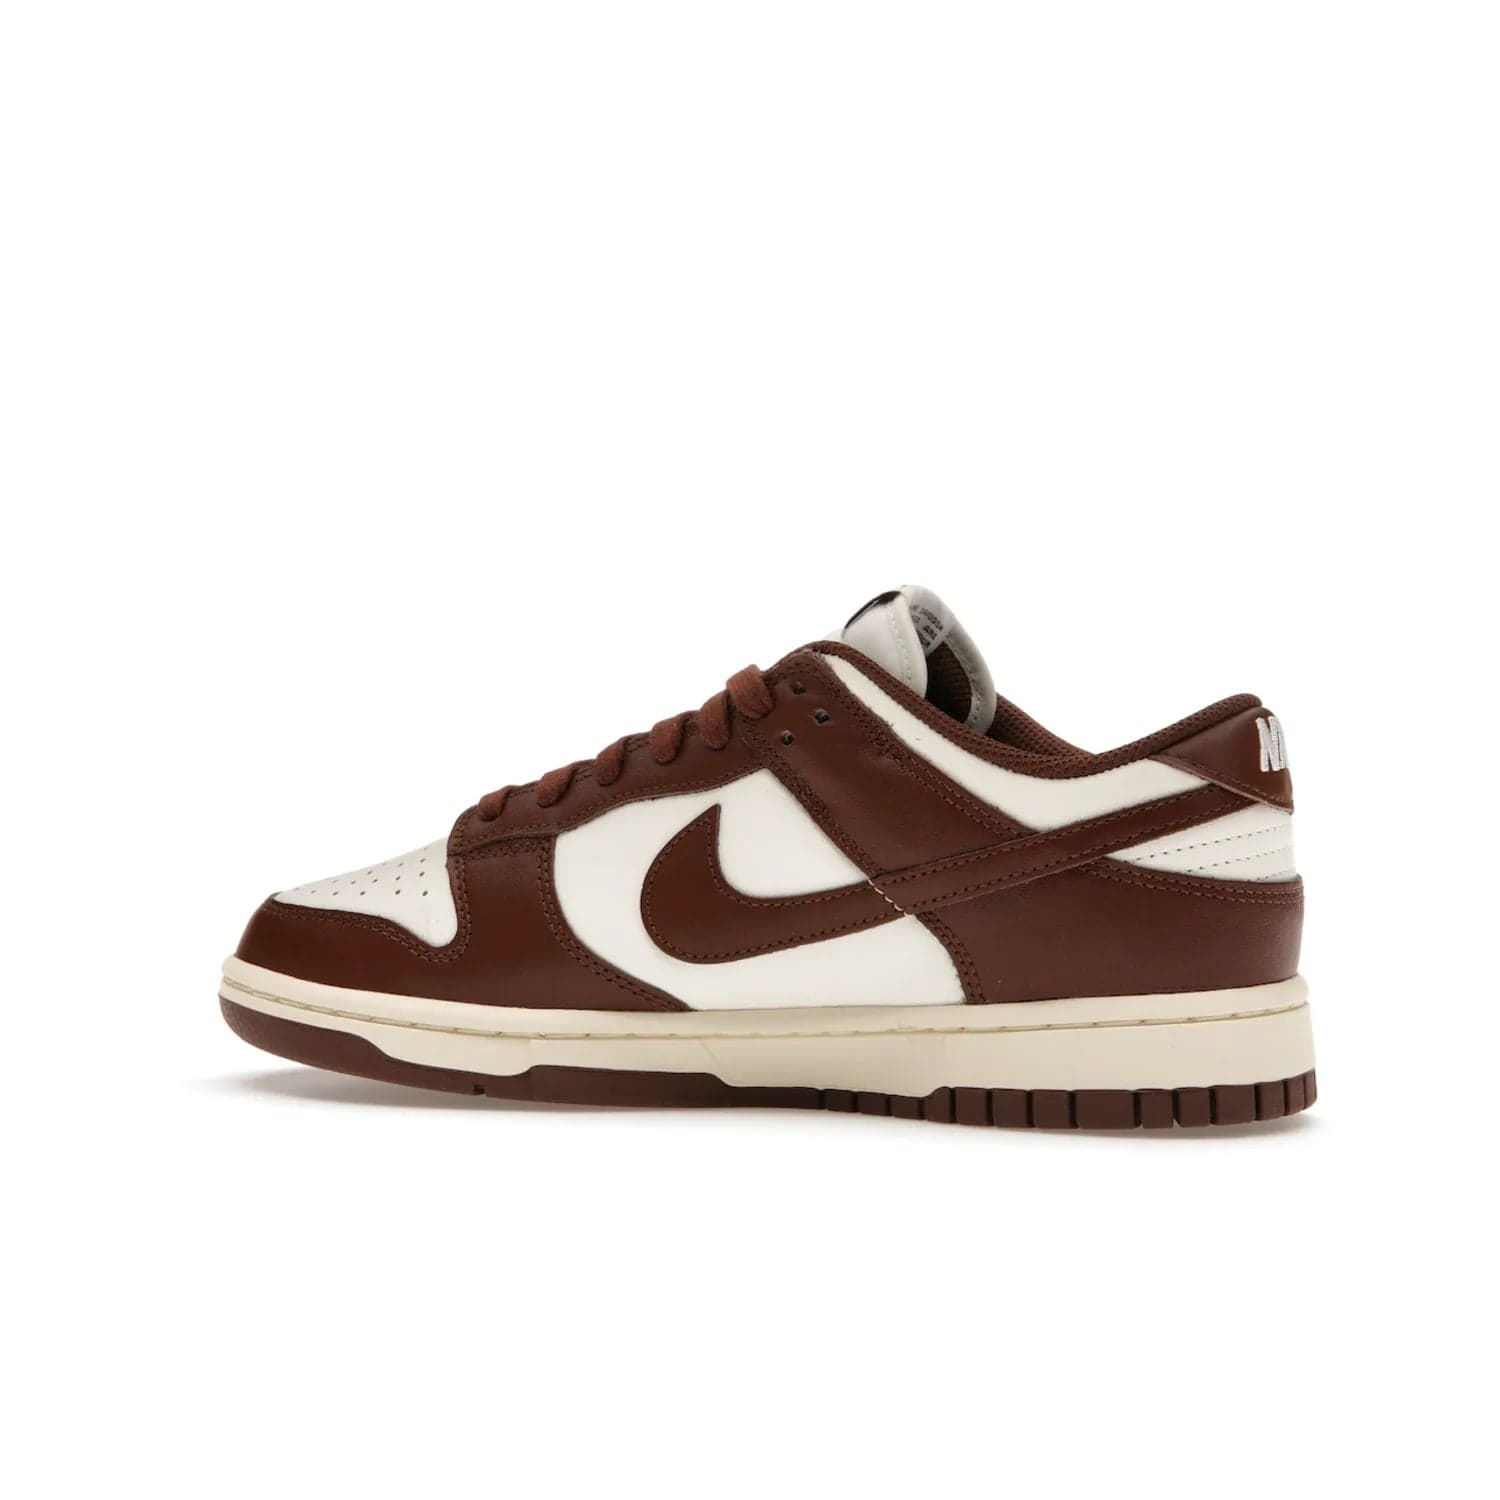 Nike Dunk Low Cacao Wow (Women's) - Image 21 - Only at www.BallersClubKickz.com - Revised
Get the Nike Dunk Low Cacao Wow and make a statement! Plush leather and a cool Cacao Wow finish bring together a unique mix of comfort and fashion that will turn heads. Boosted with a Coconut Milk hue. Shop today.